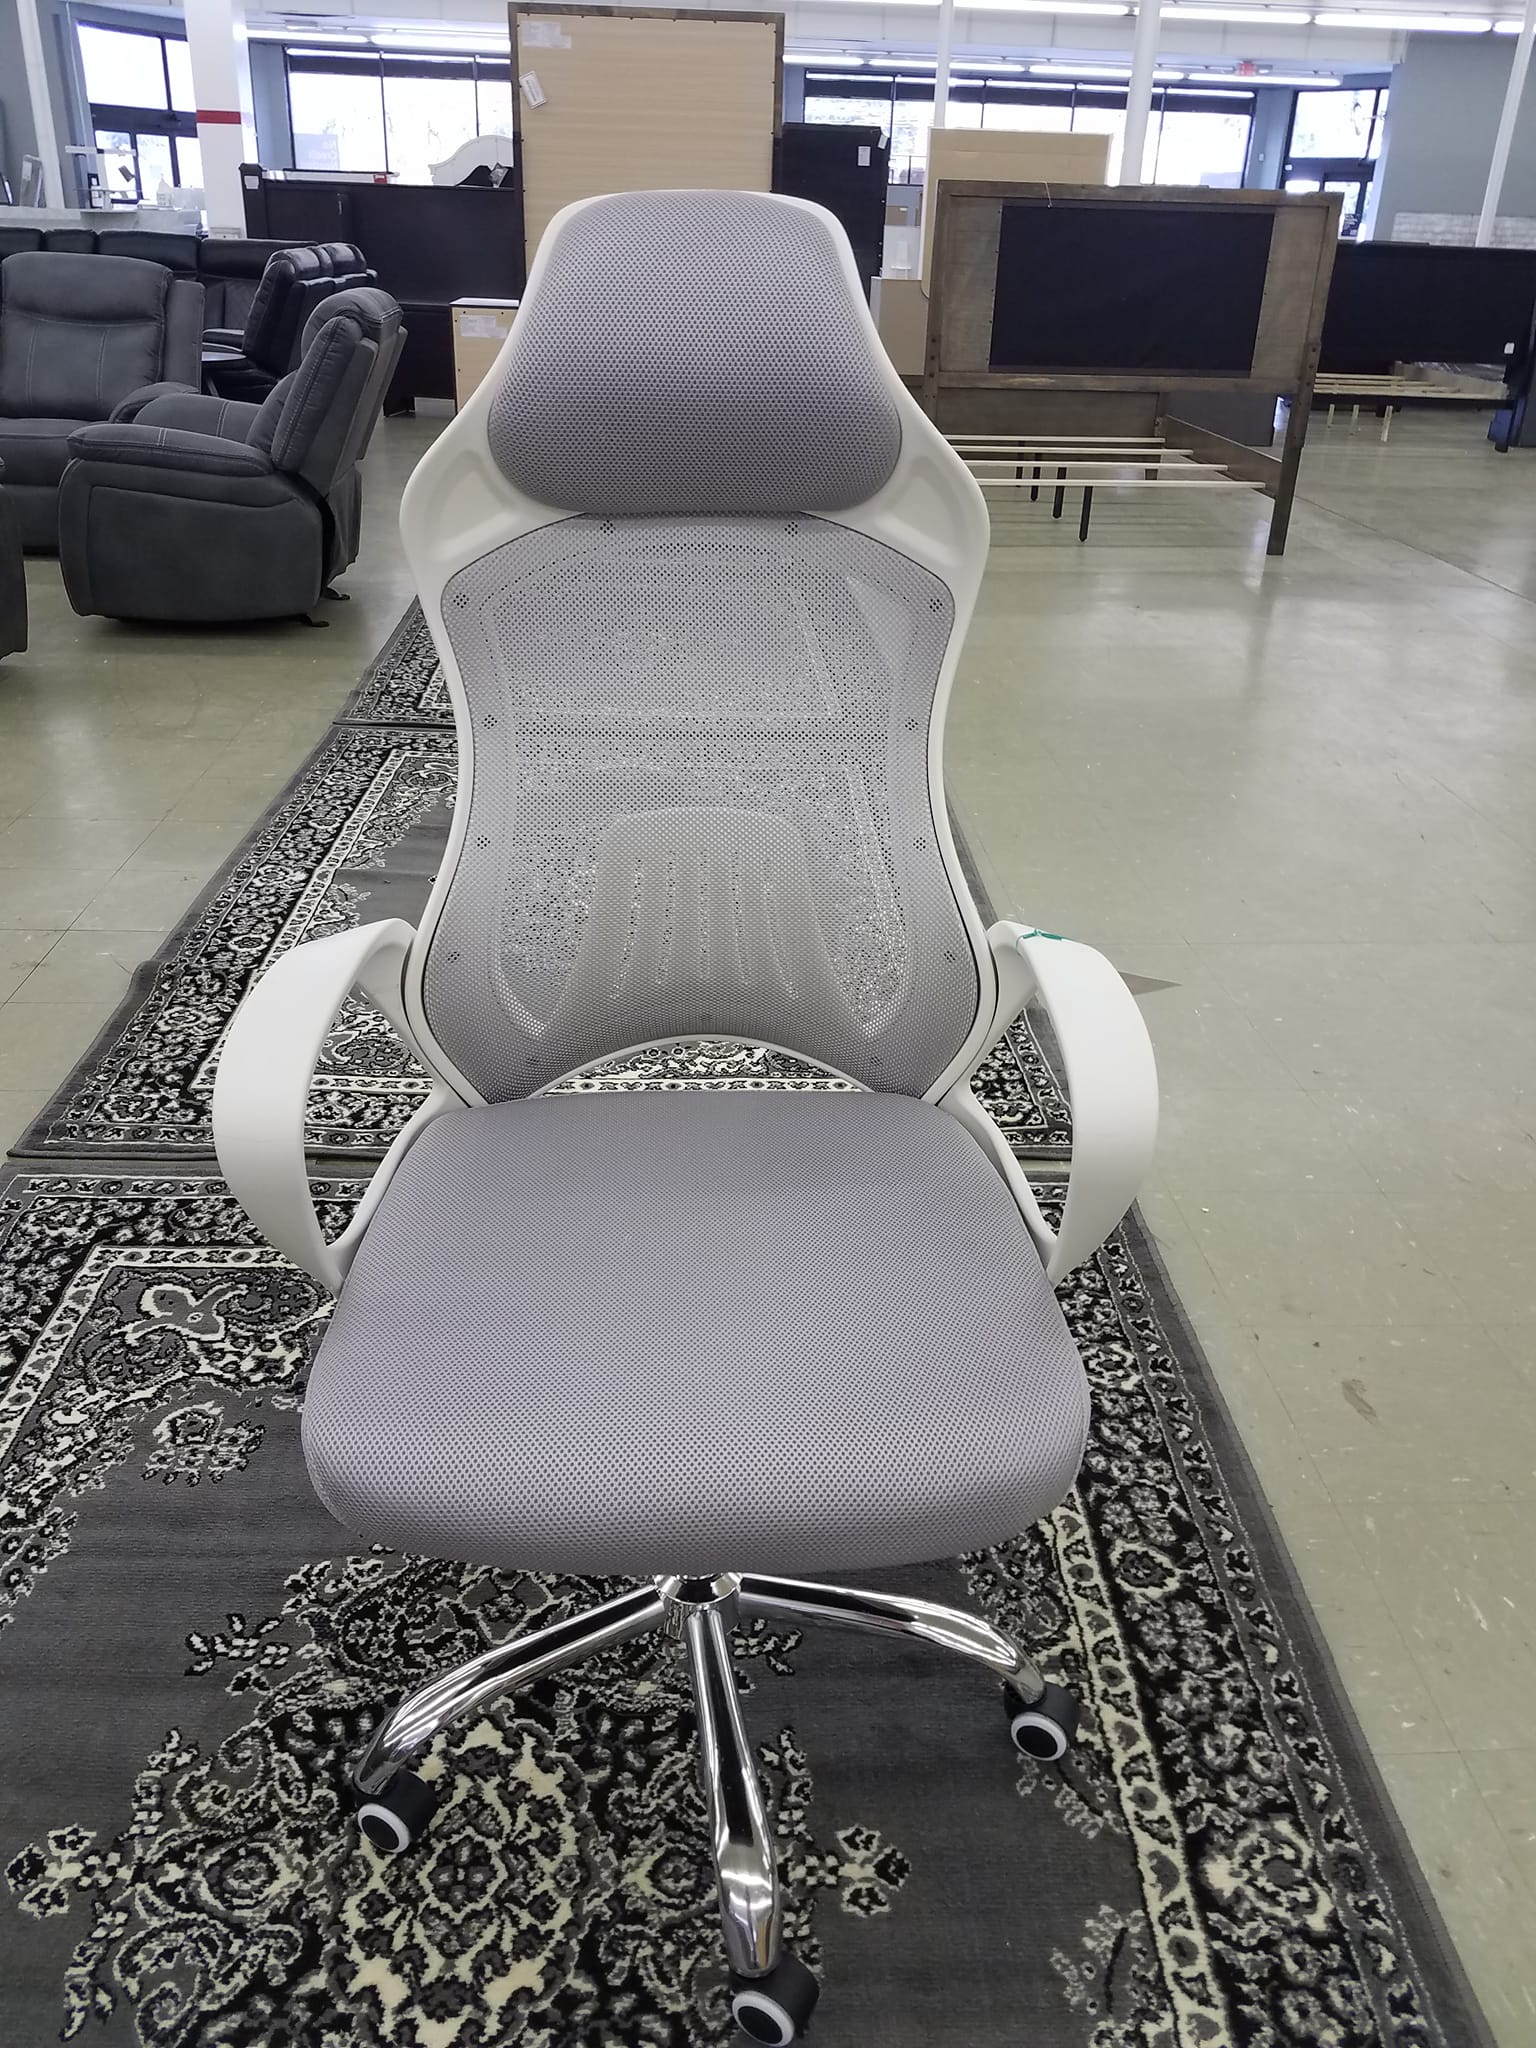 Awesome gaming chair | Eden, NC | Eden Mattress and Furniture